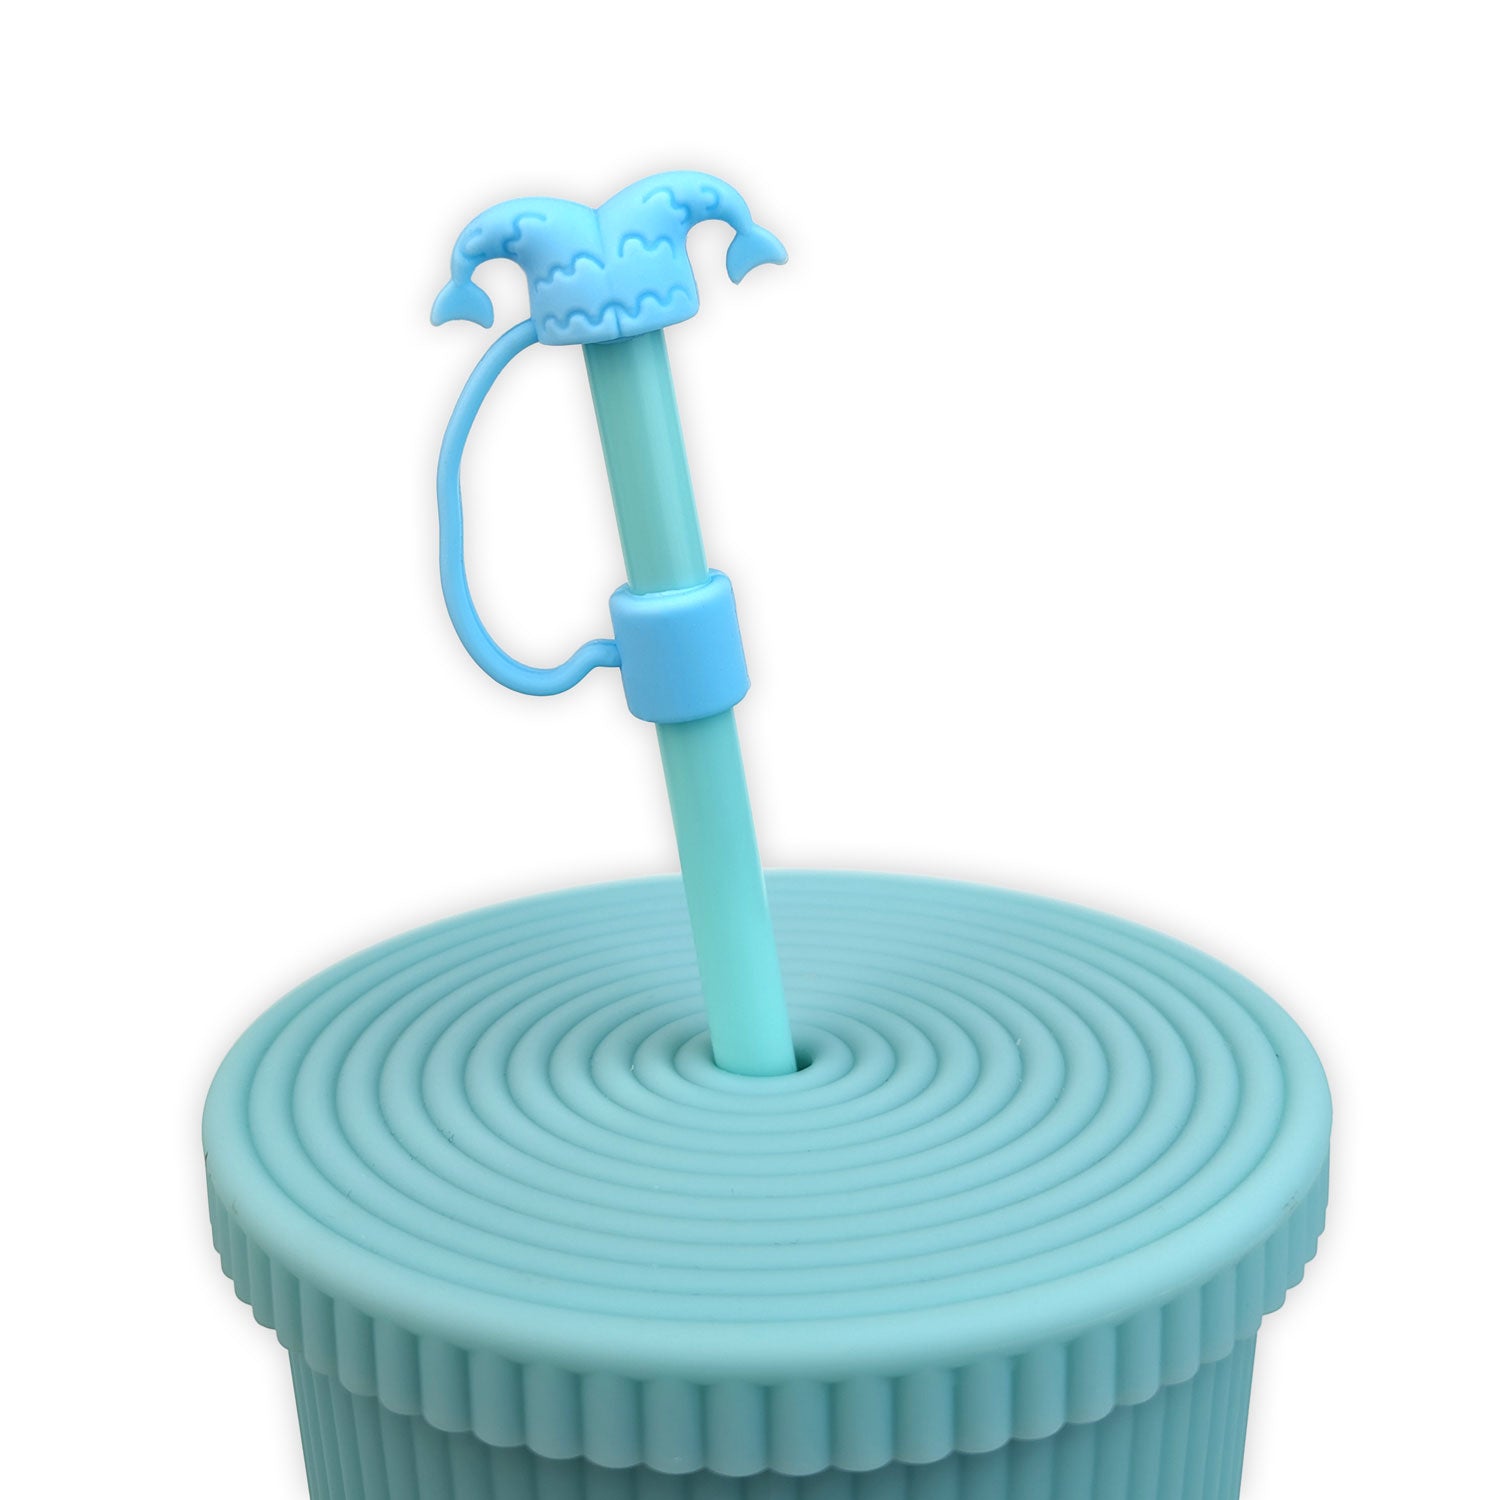 Mermaid Tail Silicone Straw Cover in Ocean Blue 7mm Wholesale